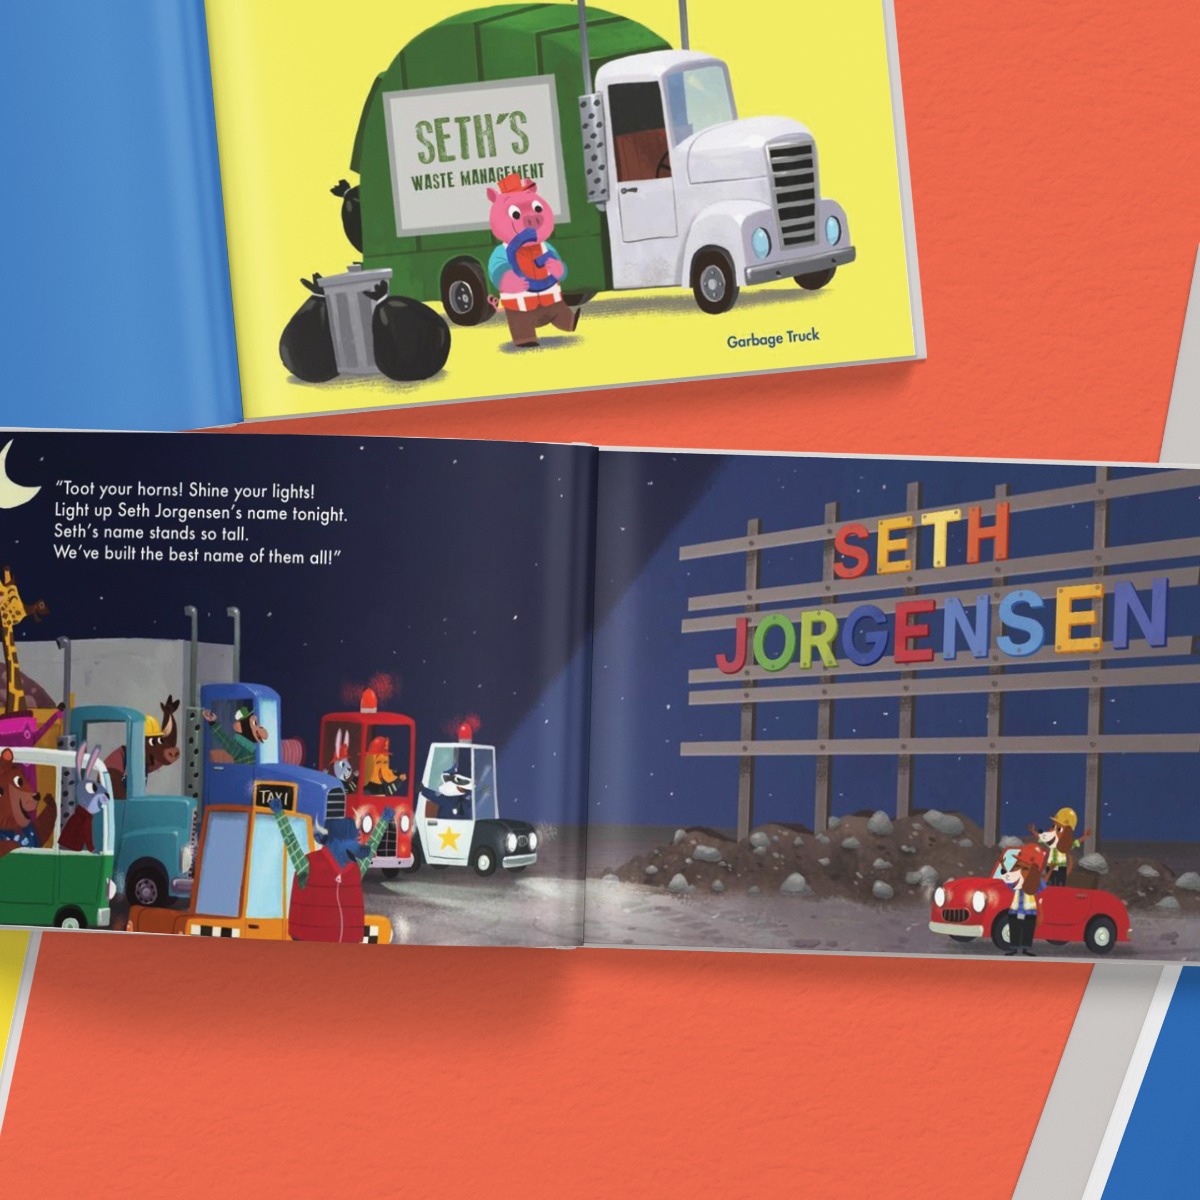 MONSTER TRUCKS Movie Personalized Book Giveaway - Twin Cities